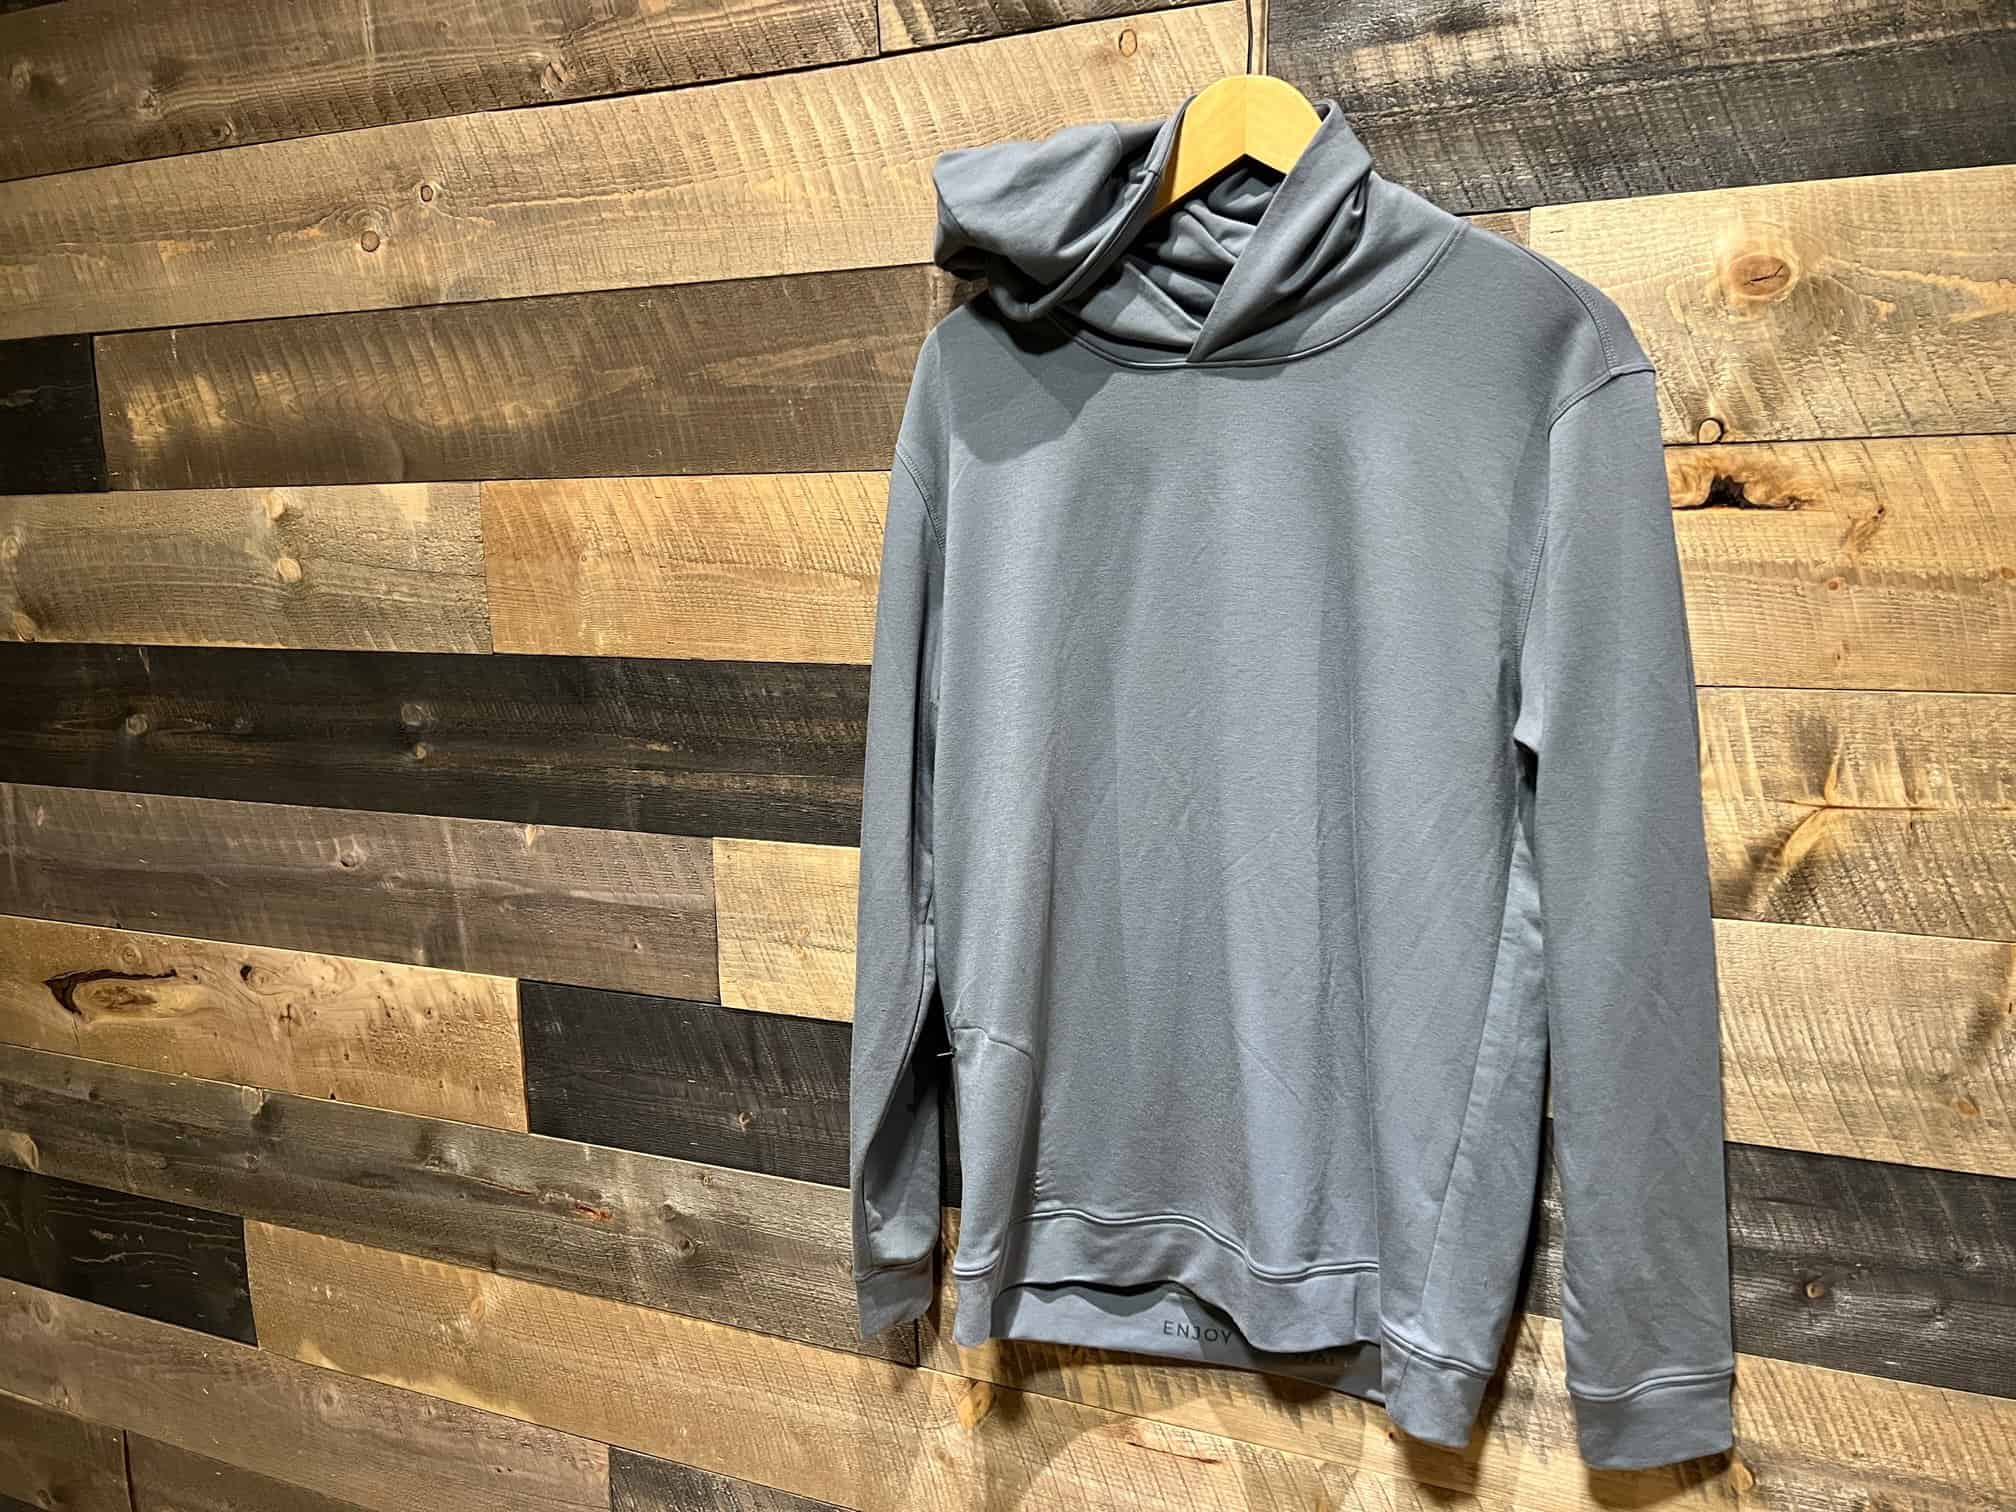 TRUE All Day Hoodie Review - Independent Golf Reviews